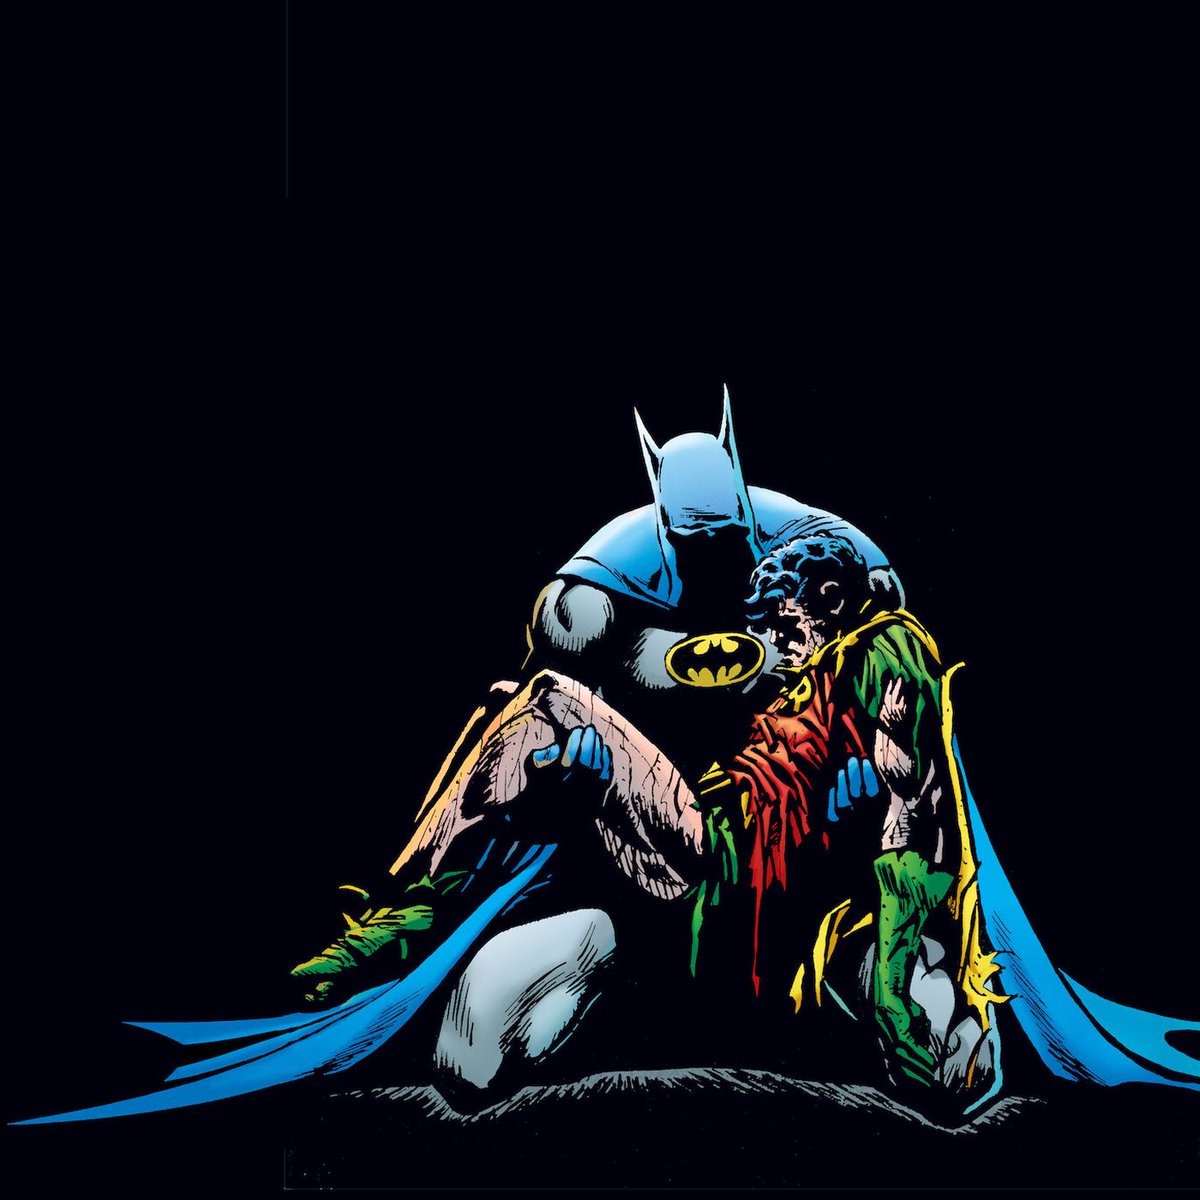 The votes came in, and when the phone lines closed the totals were 5,271 to 5,343. Jason Todd, would die by a difference of only 72 votes.